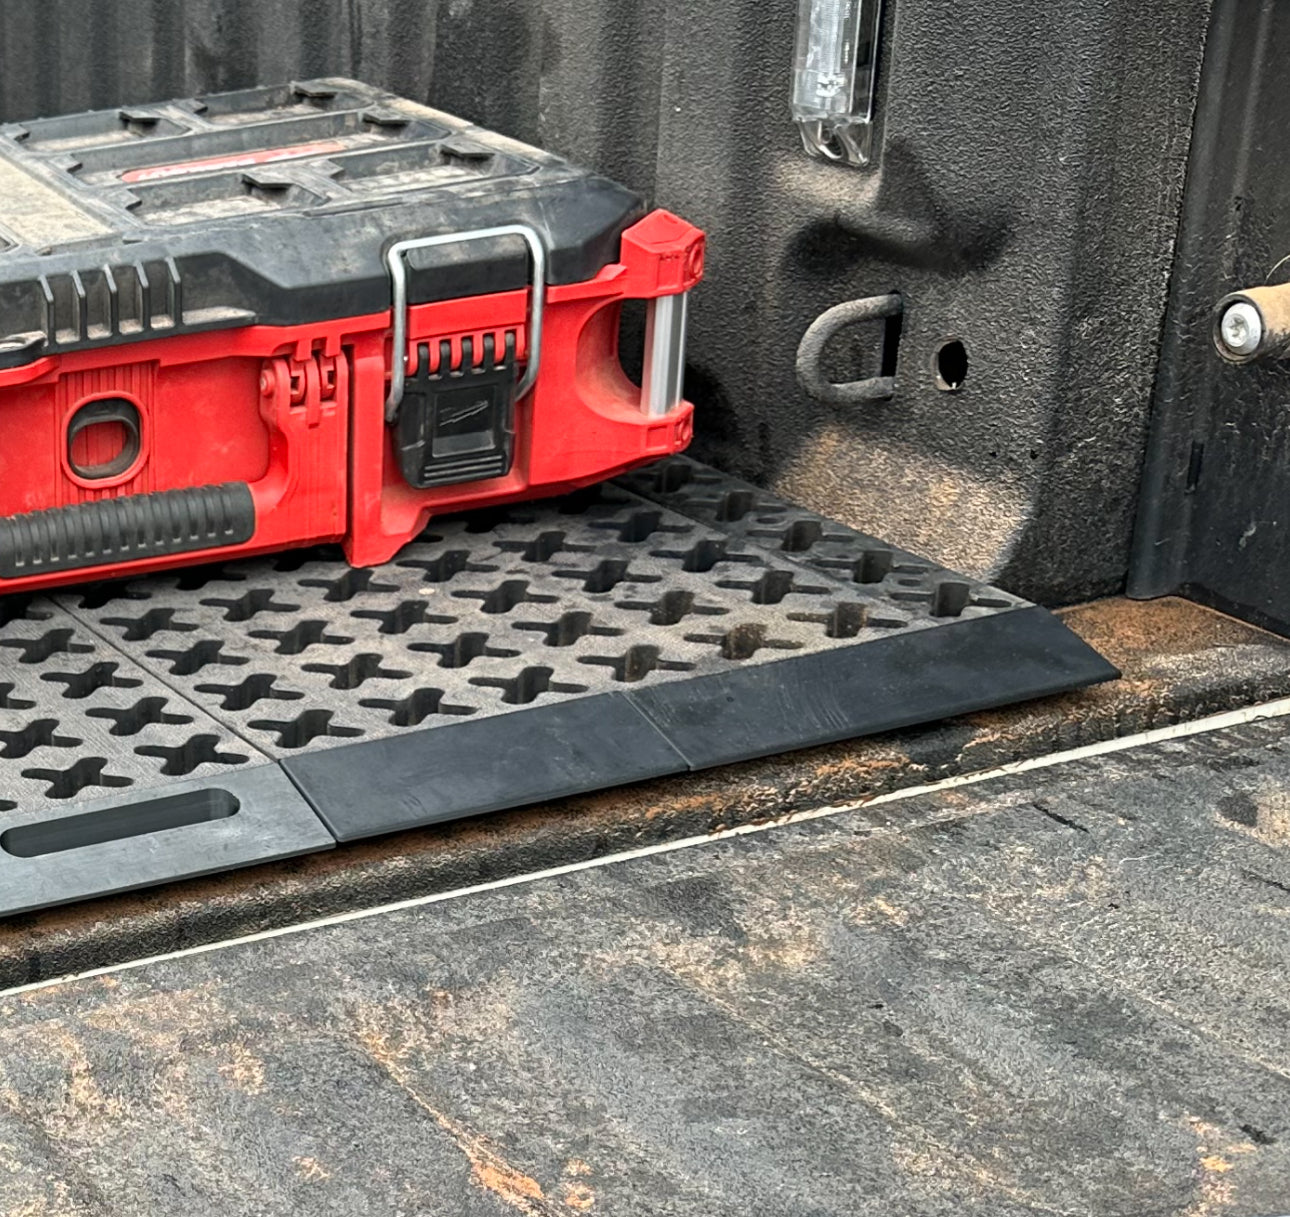 Tmat ramp set and handle in a dirty pickup with a tool box.